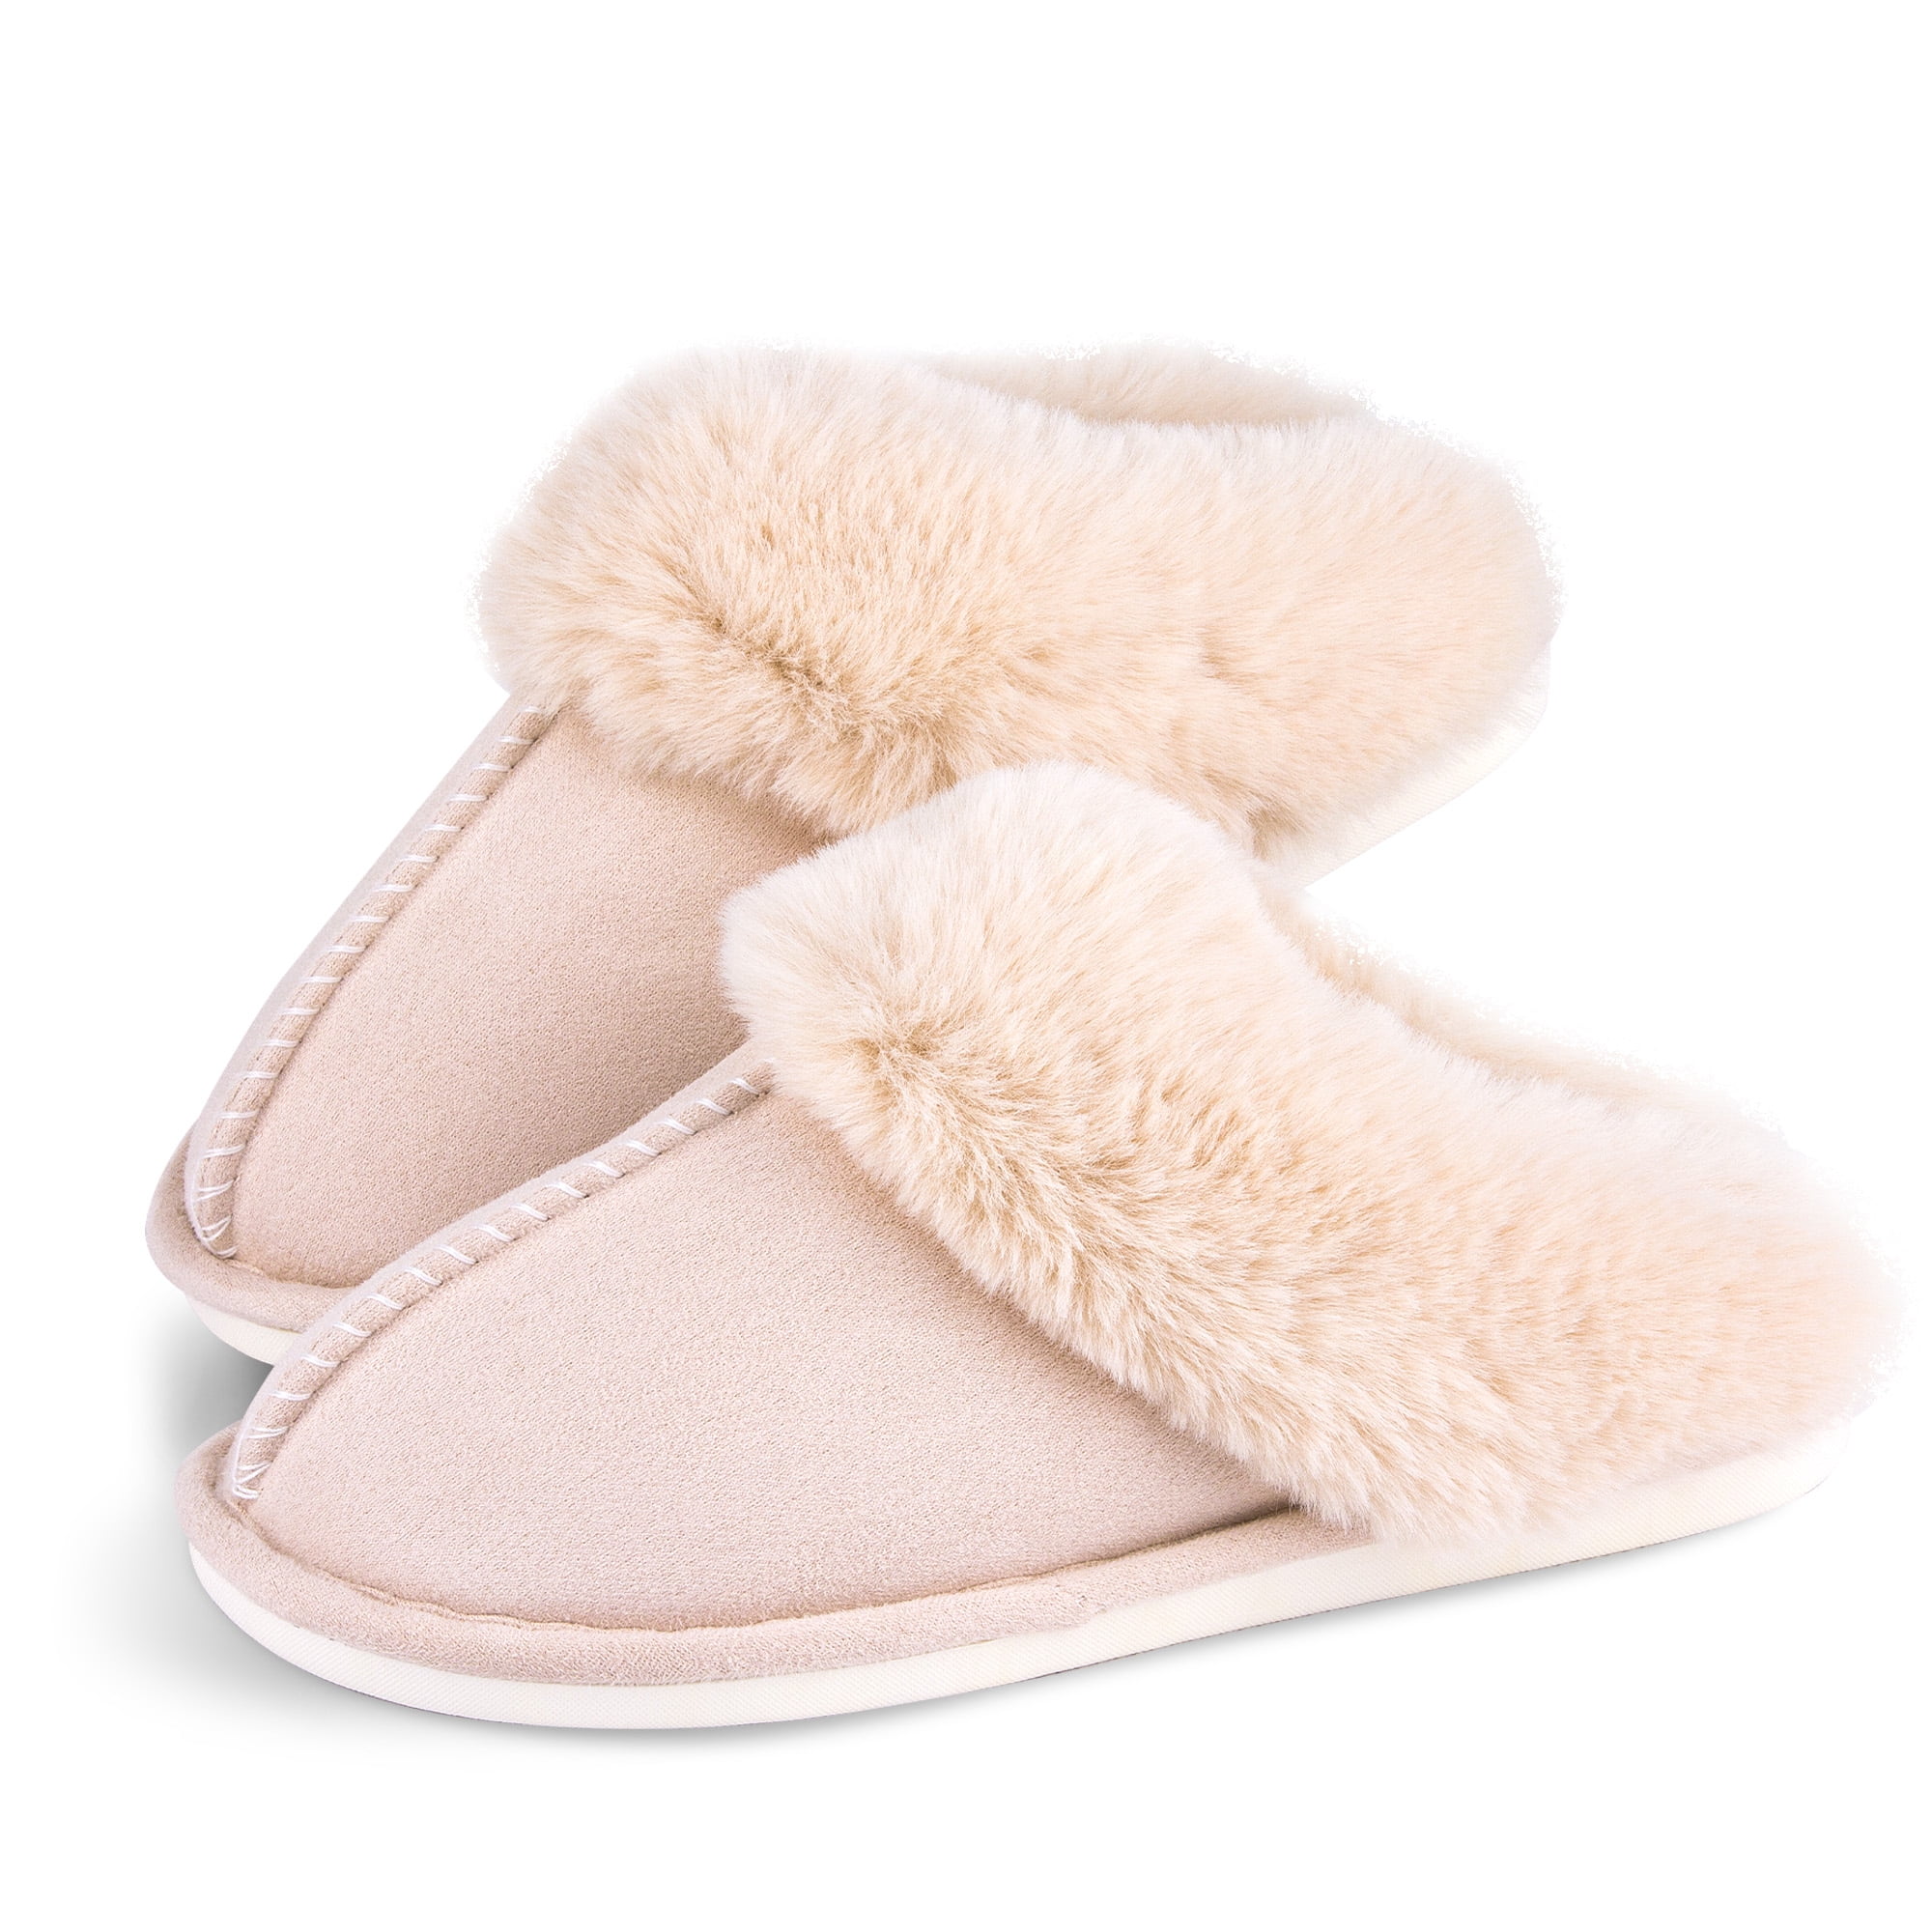 Womens Slippers Cozy Warm Winter Slip On House Shoes Fluffy Soft Memory ...